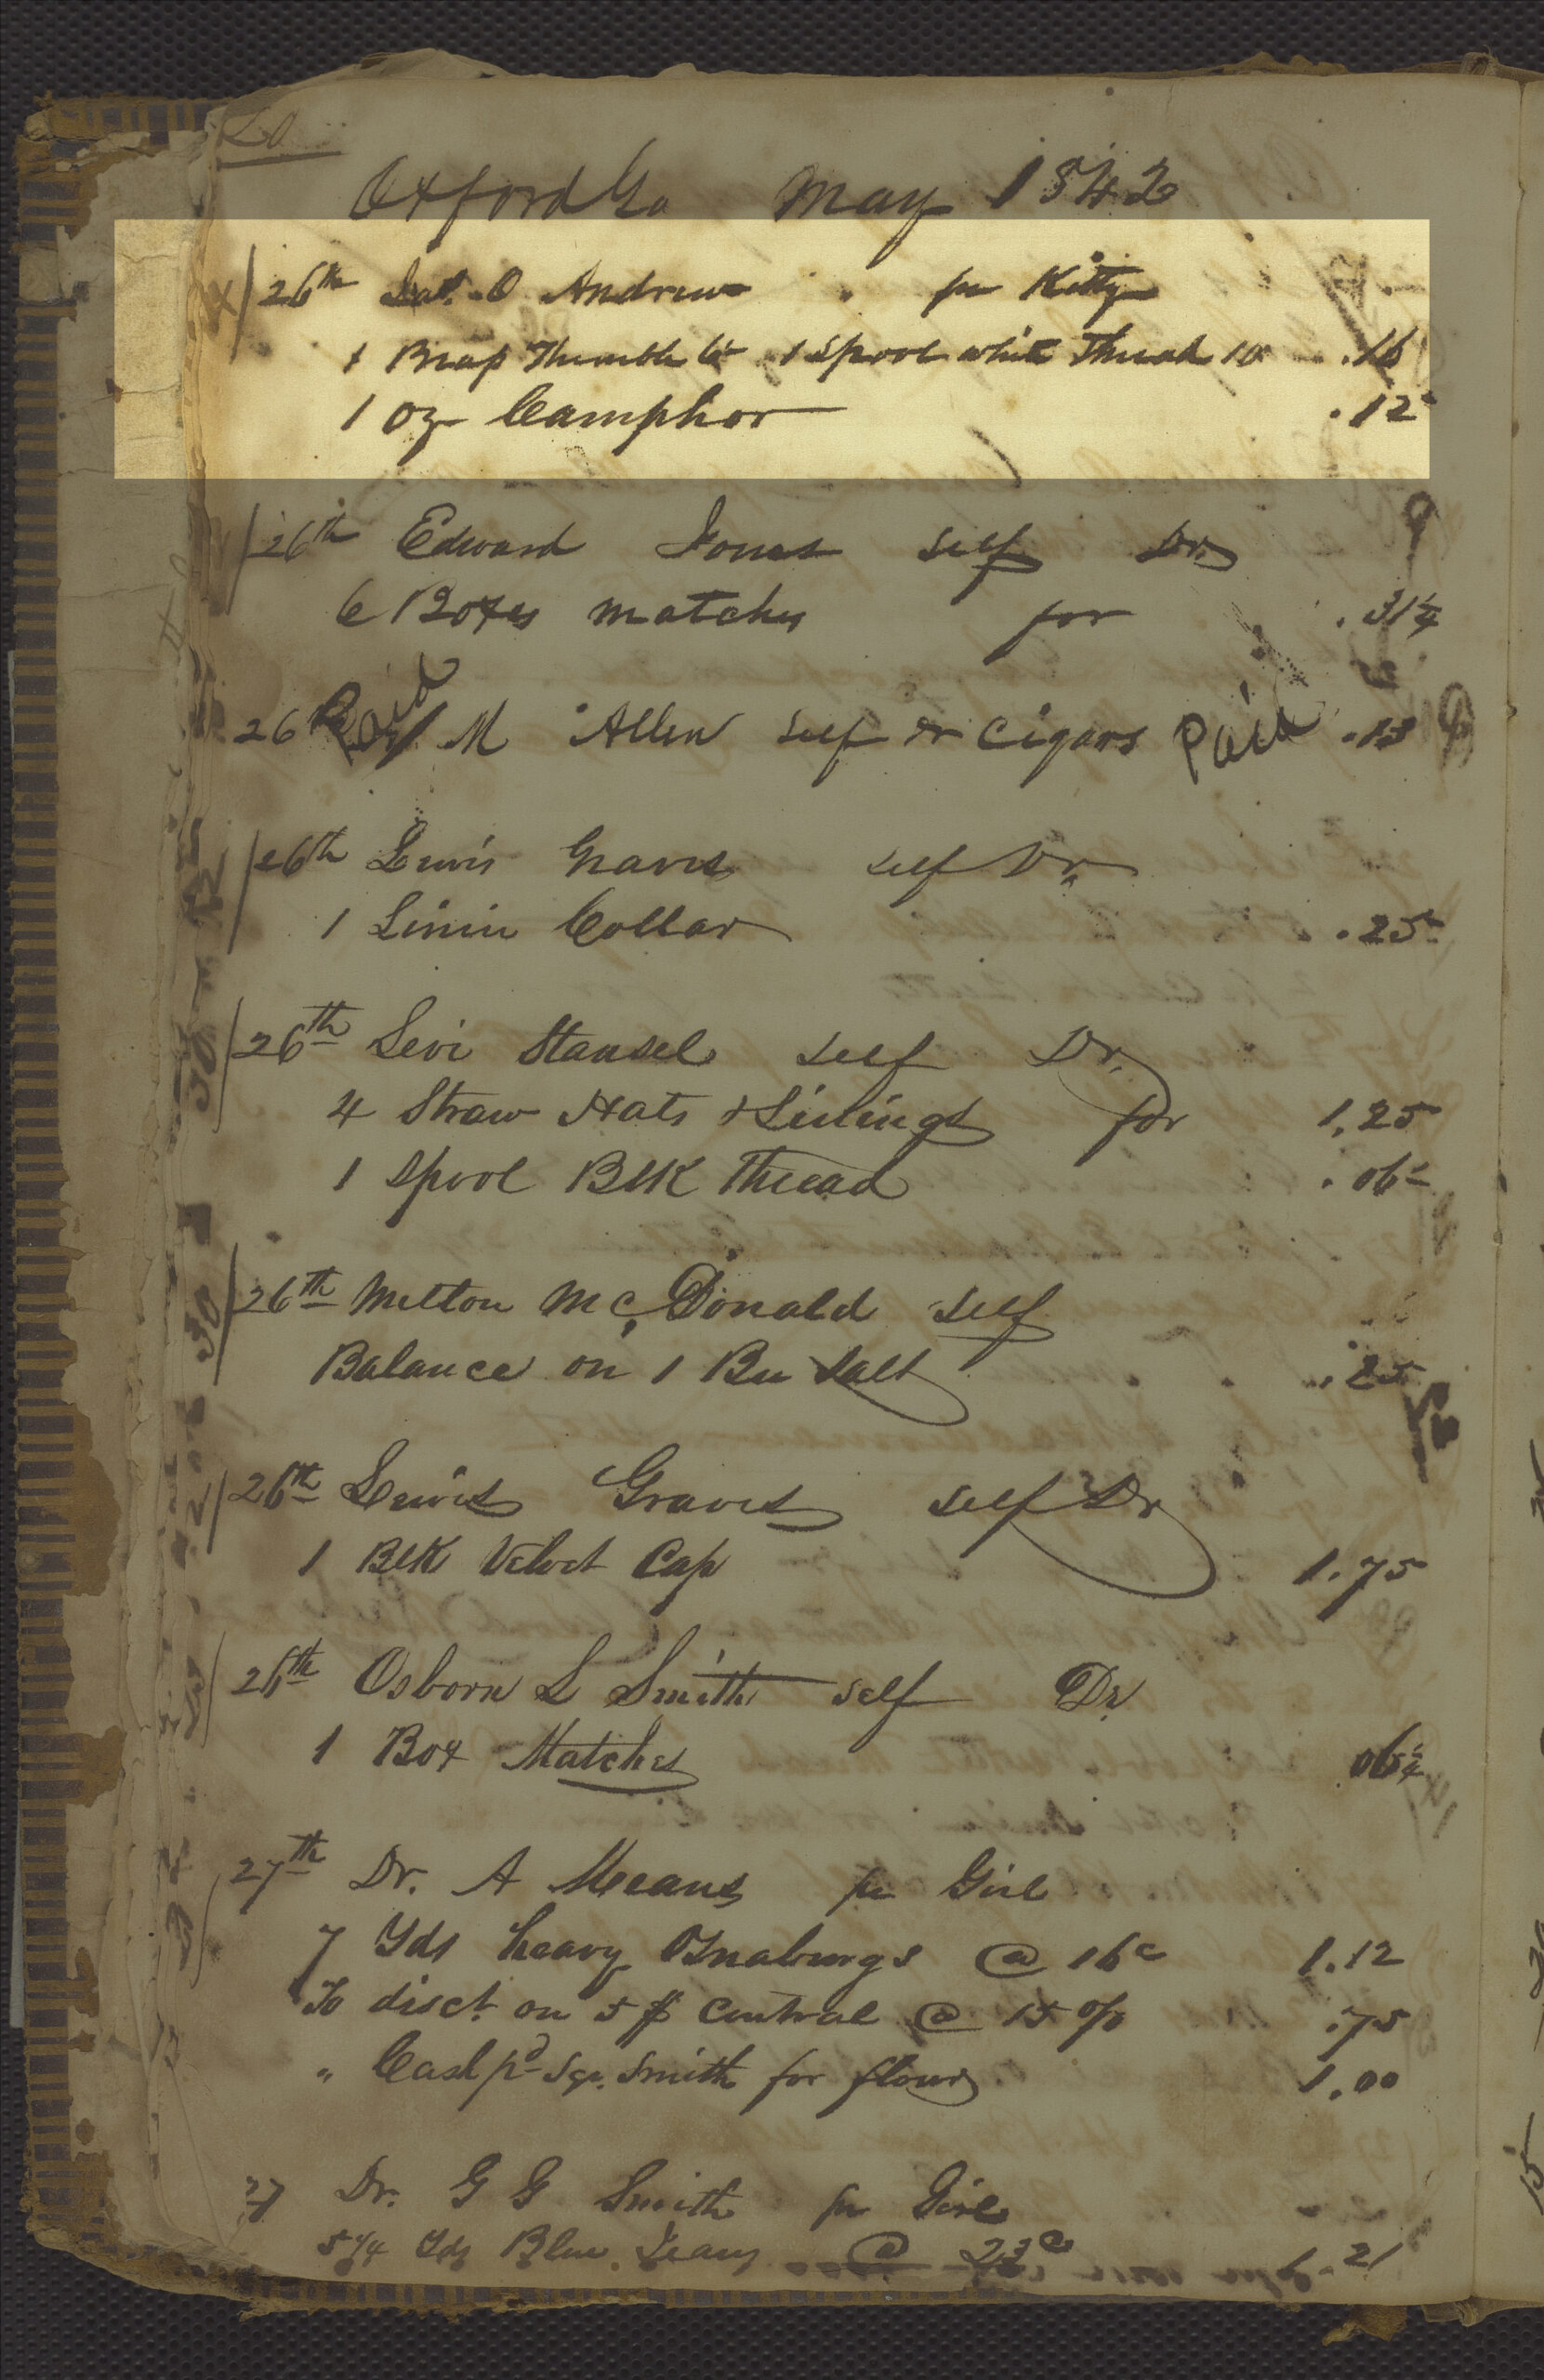 page from Oxford General store account book.